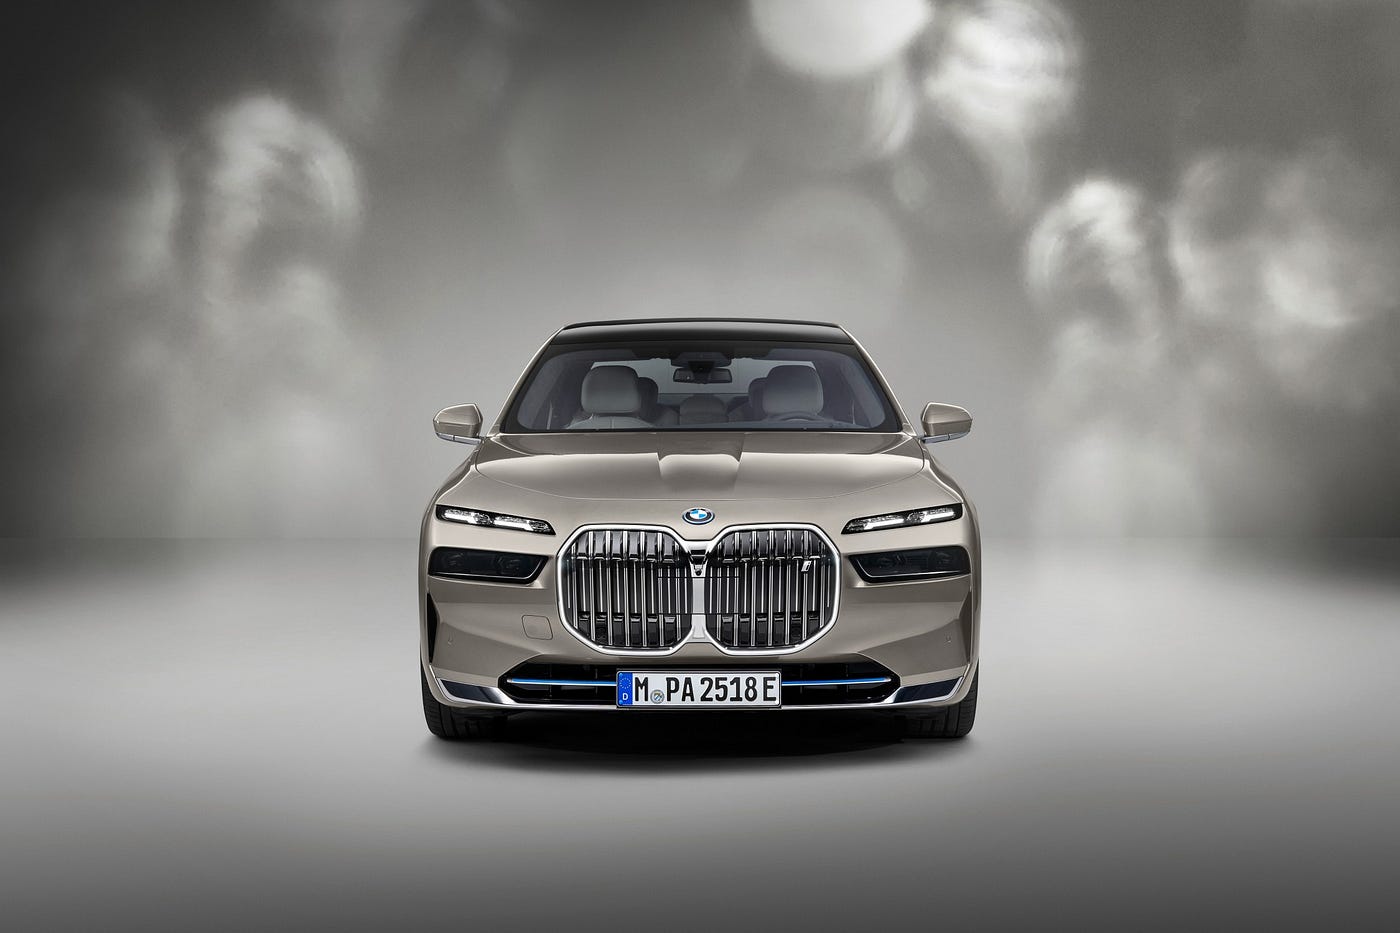 BMW Isn't Crazy: It's China-Centric, by Beppo Brun, Automotion